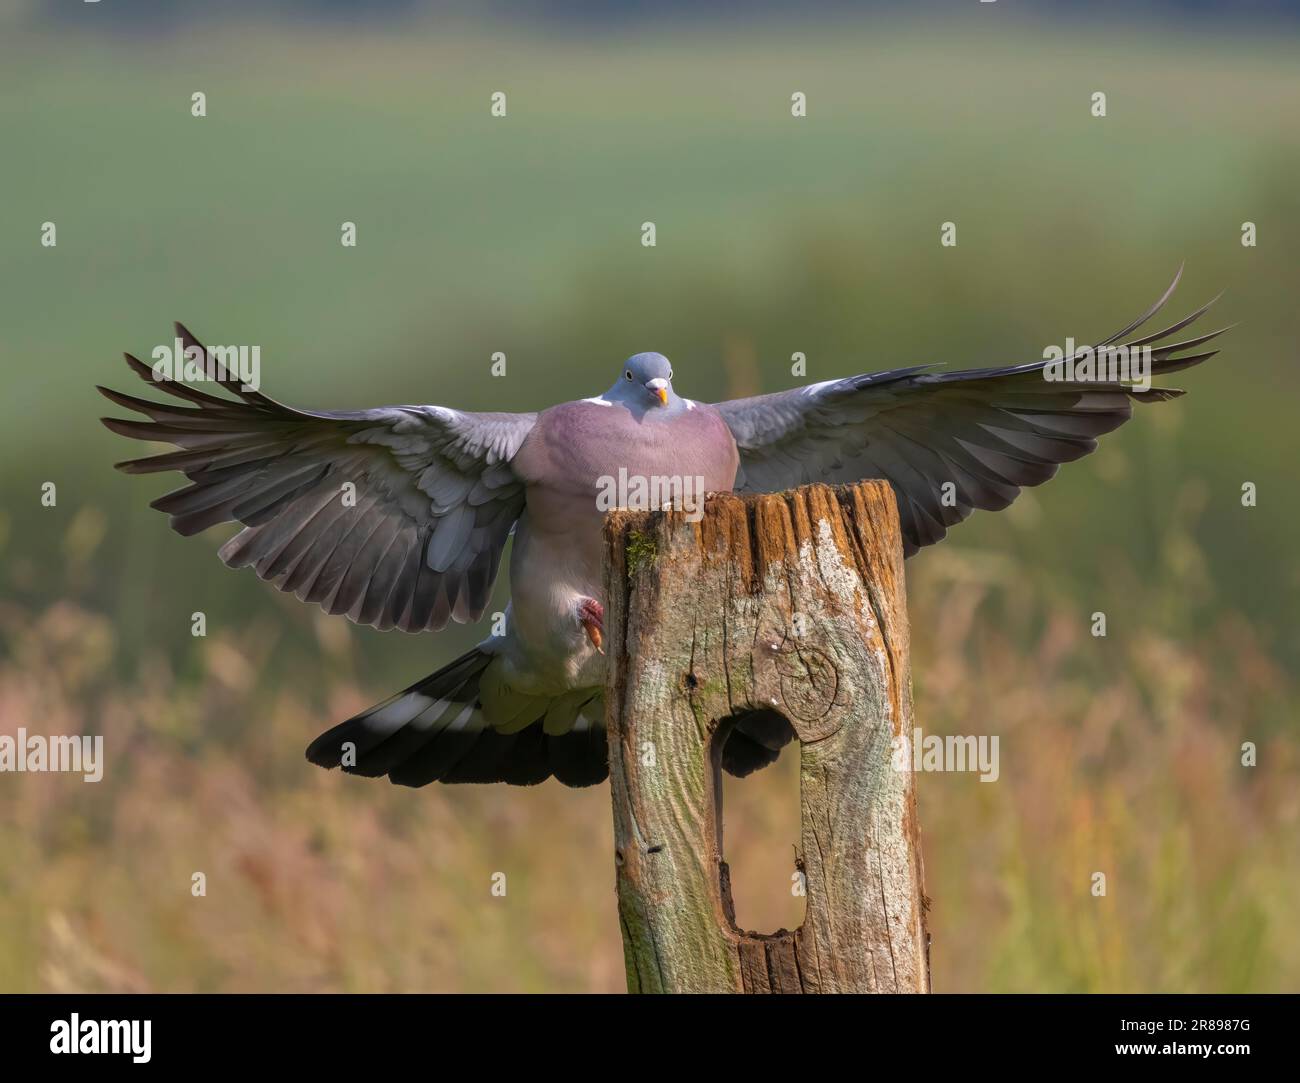 A Wood Pigeon, (Columba palumbus), lands with wings spread wide, on an old wooden fence post Stock Photo